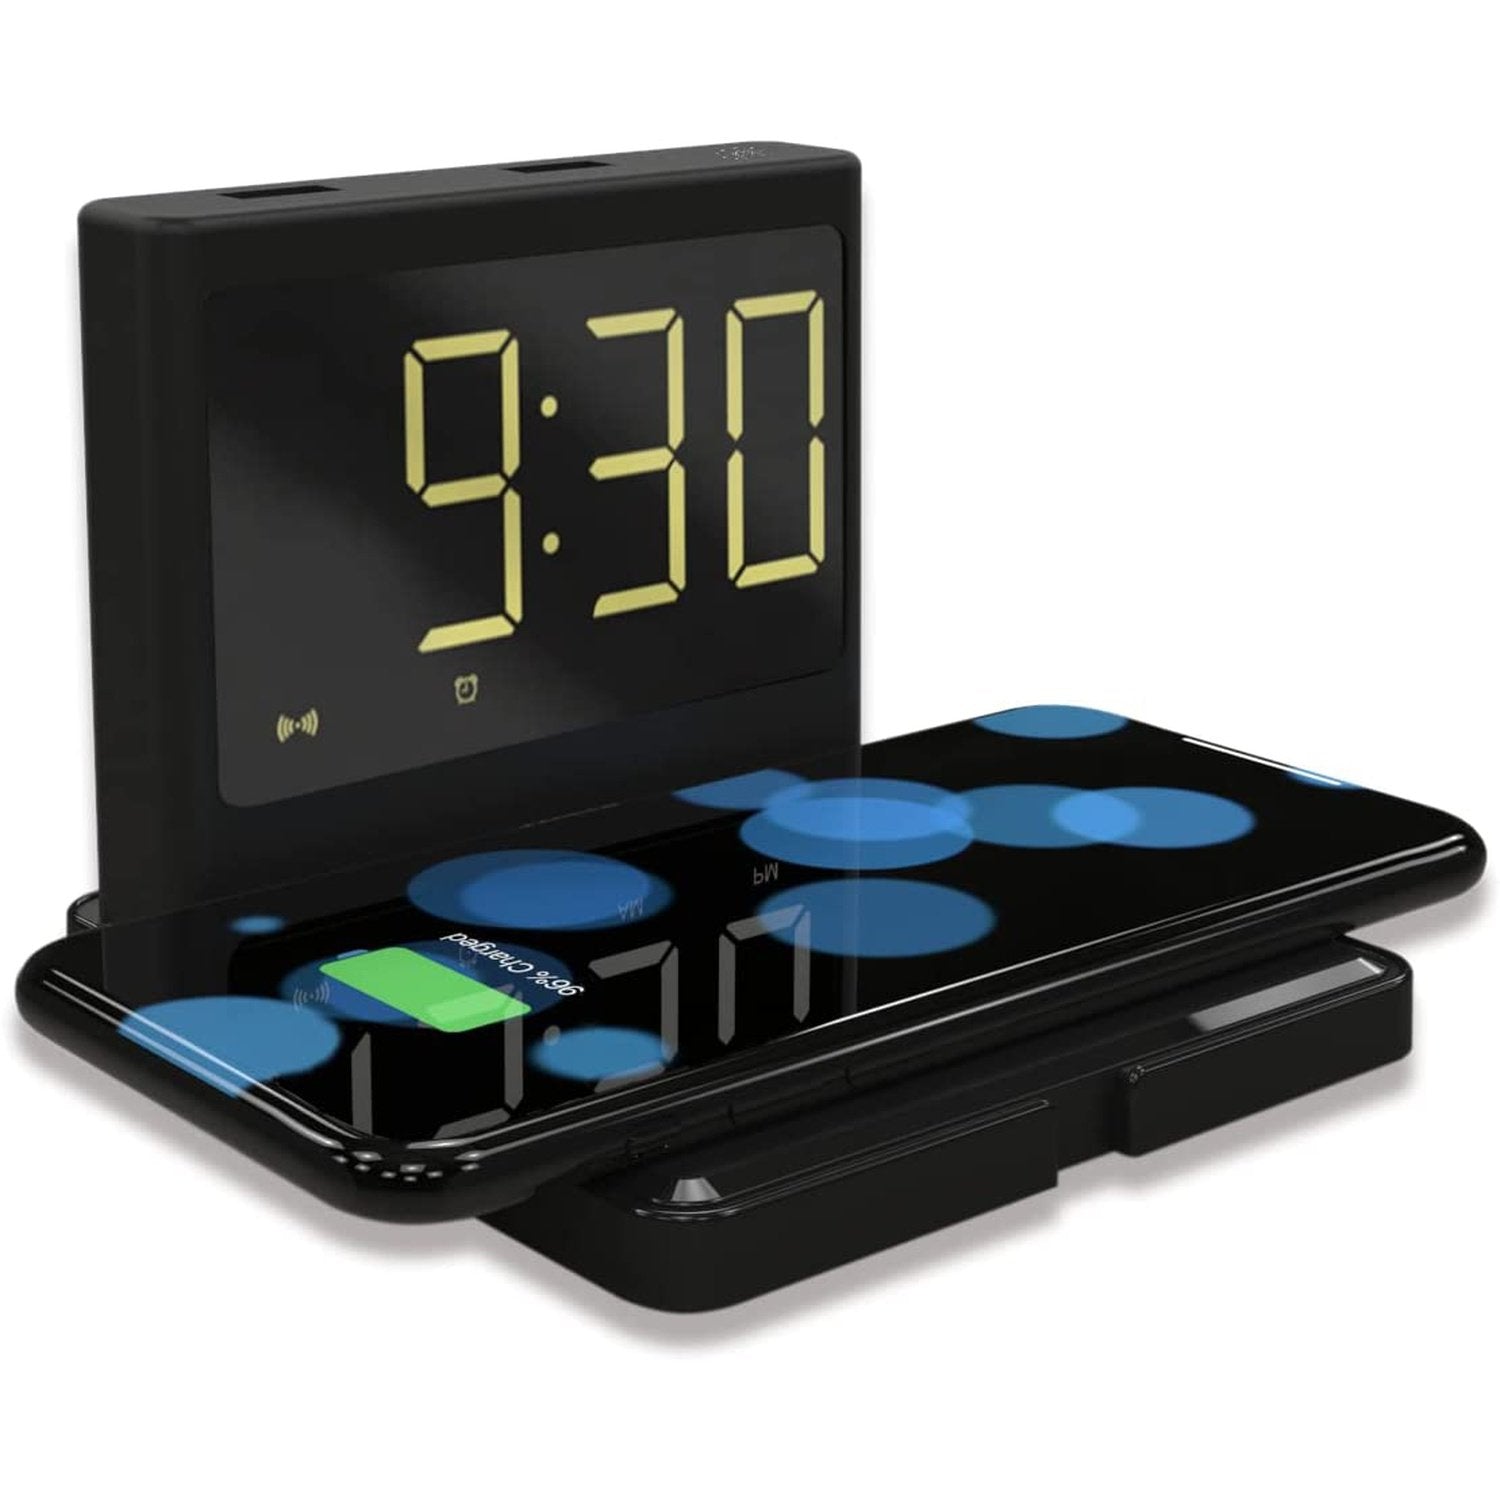 Alarm Clock with Wireless Charging Pad for Smartphones